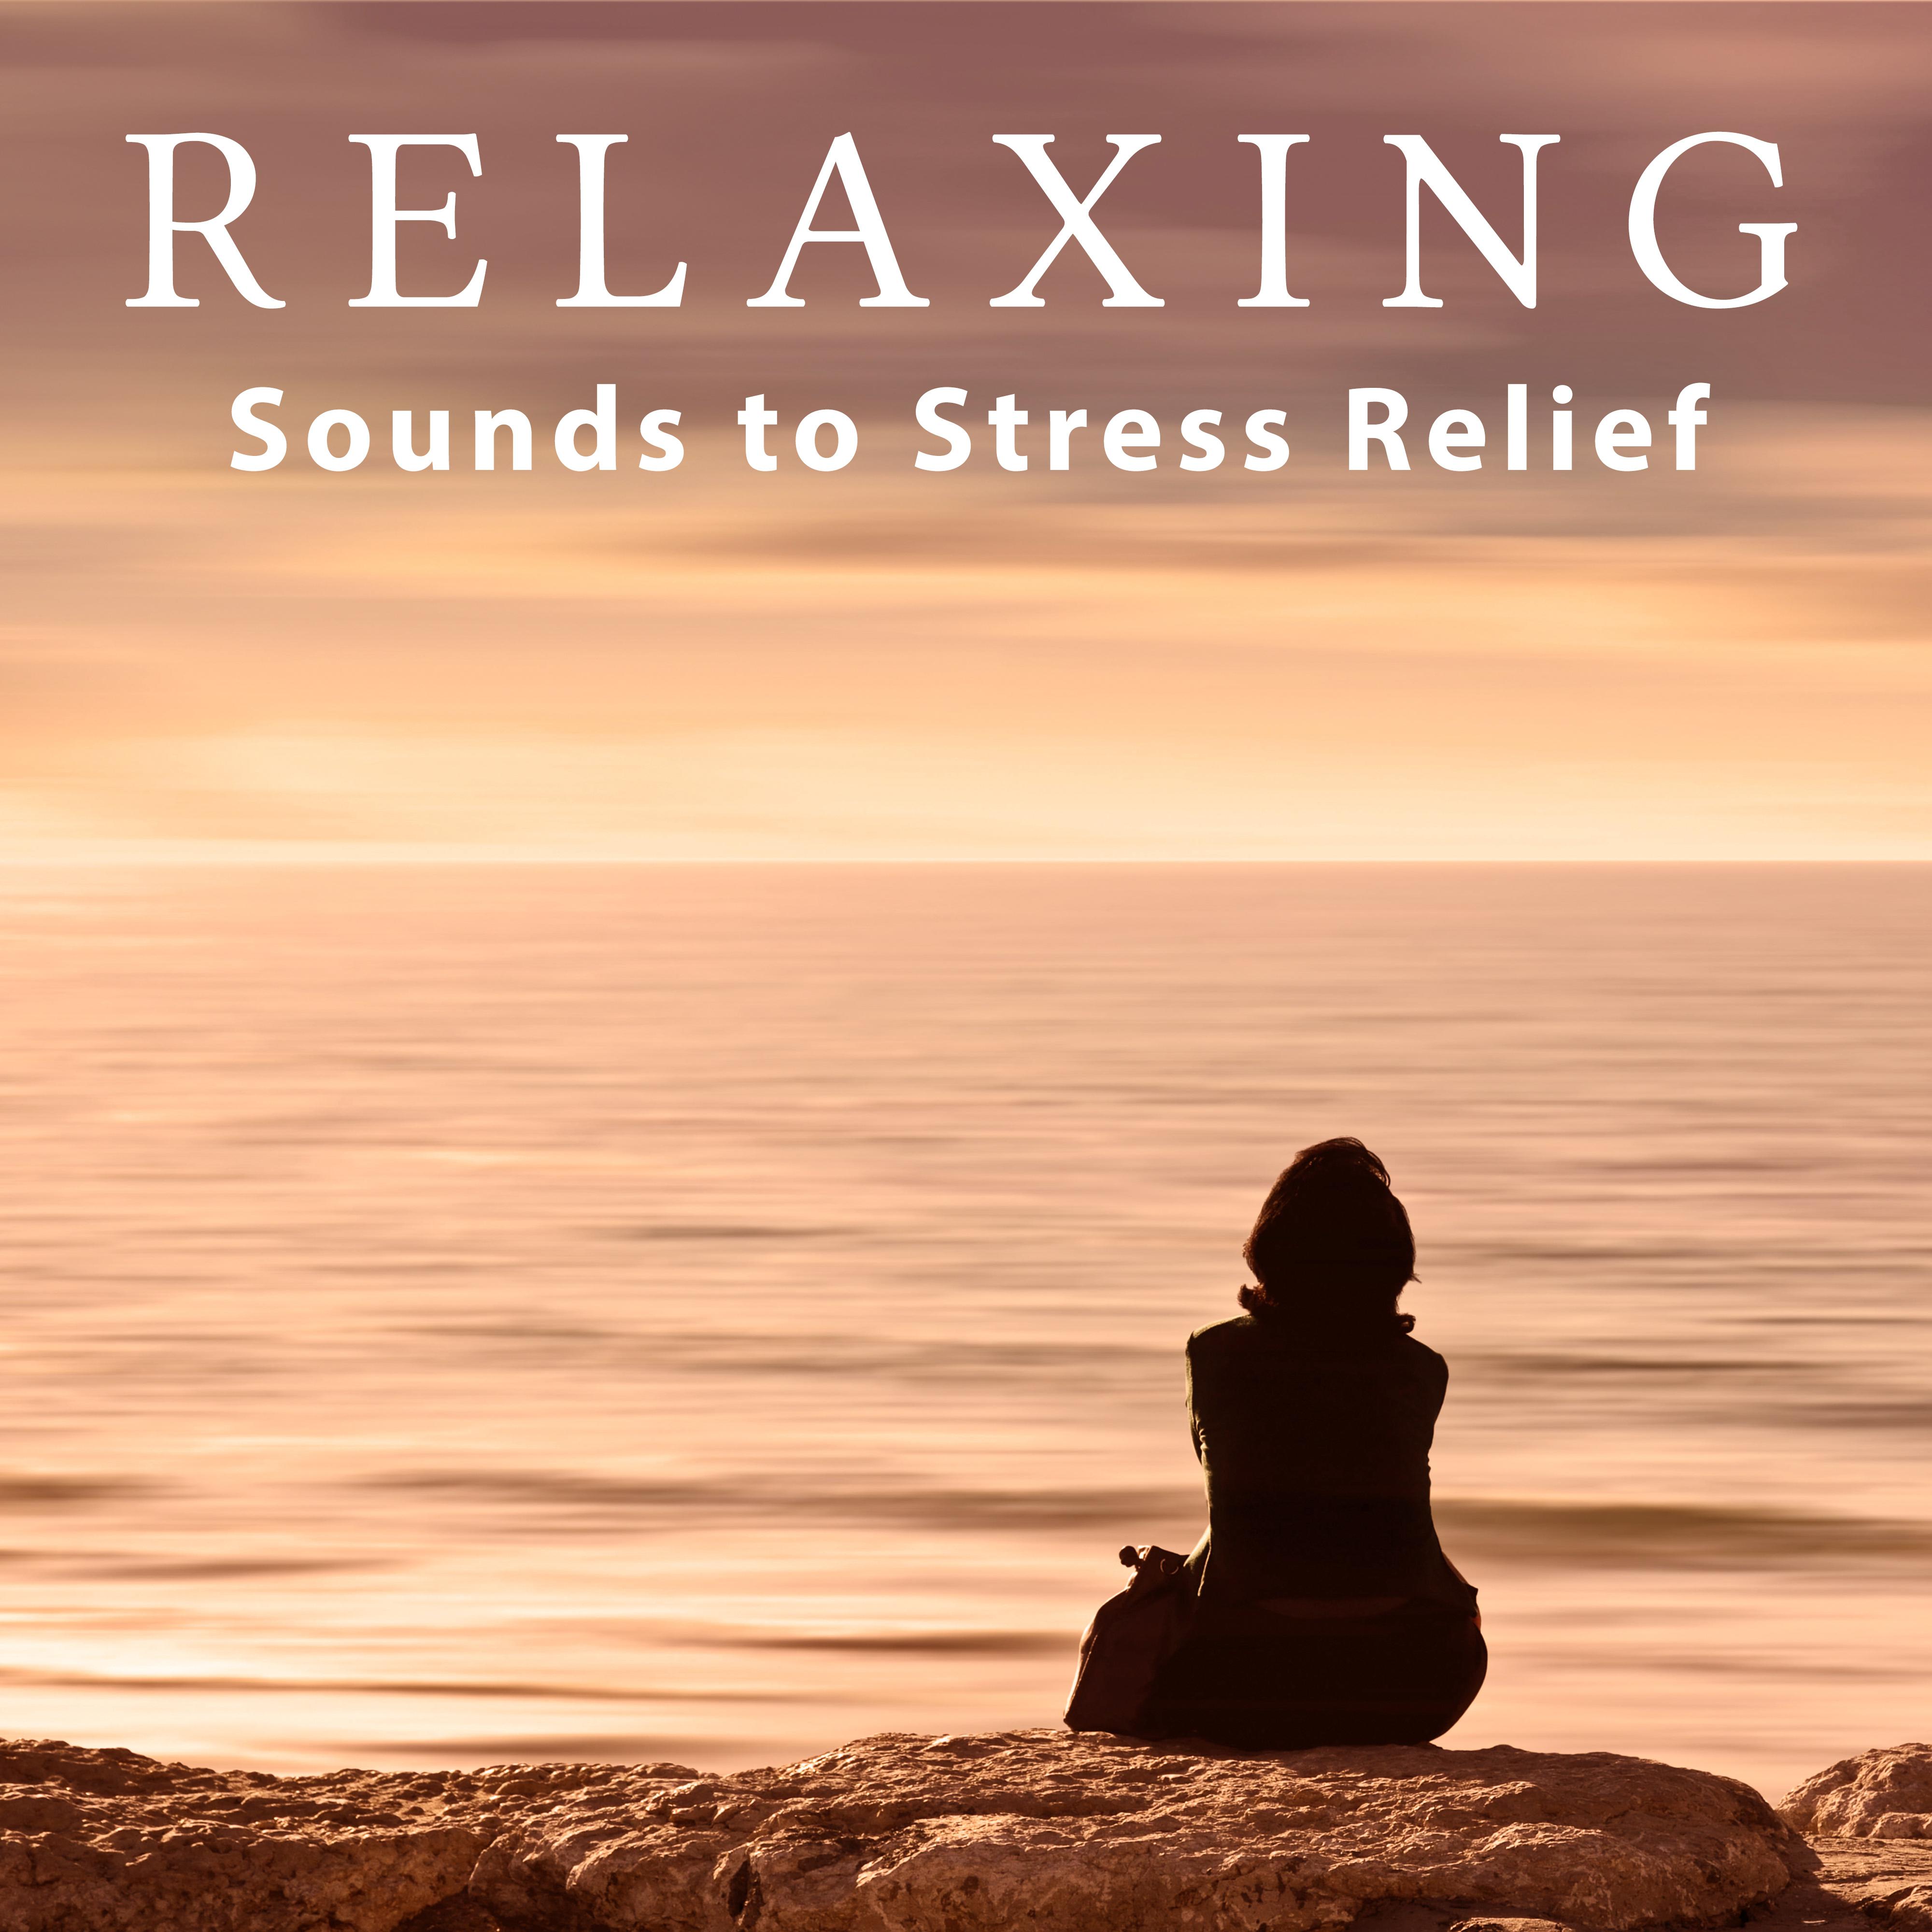 Relaxing Sounds to Stress Relief  Chilled Music, New Age Relaxation, Rest a Bit, Spirit Calmness